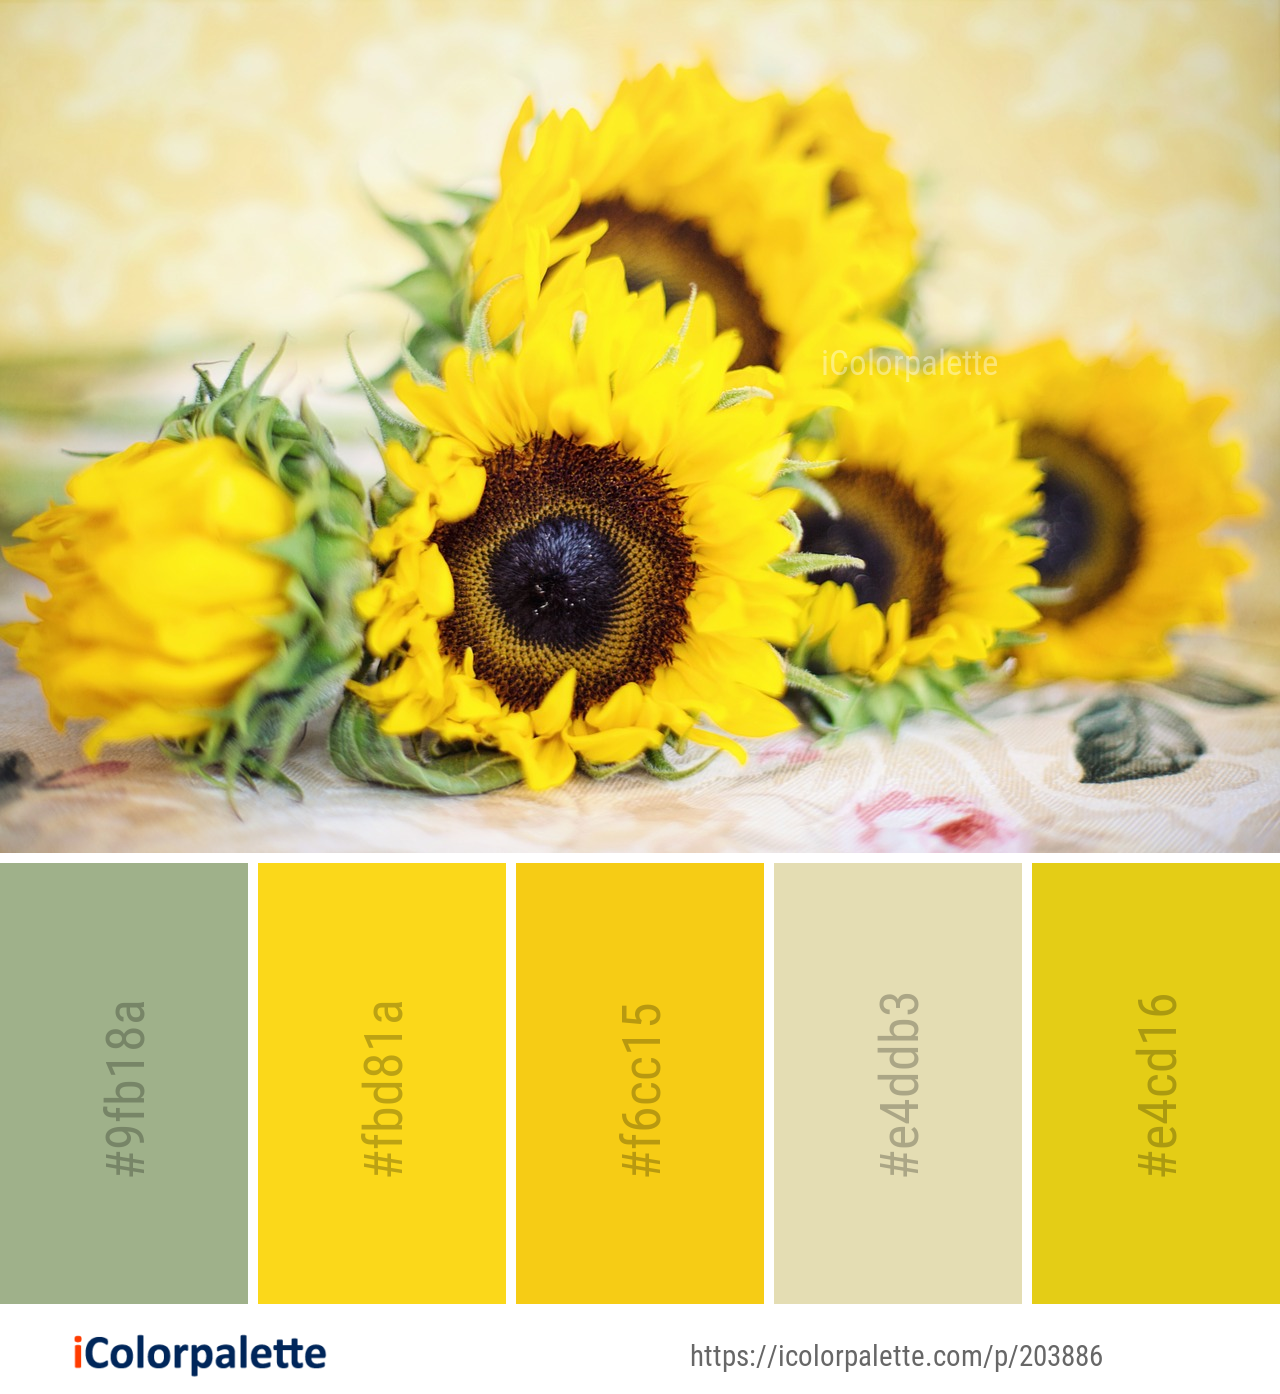 Color Palette Ideas from Flower Sunflower Yellow Image | iColorpalette